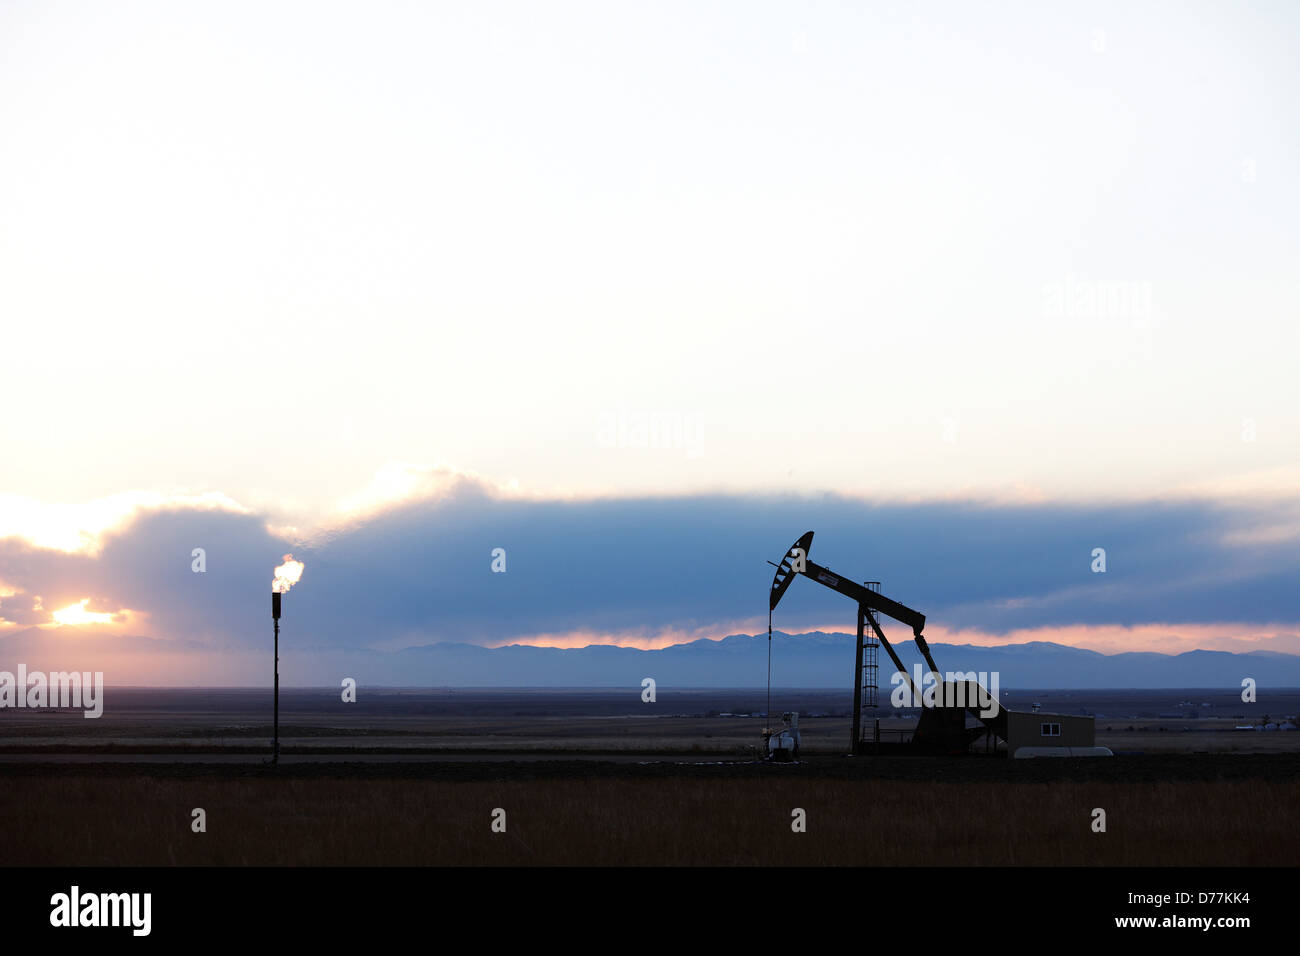 Oil well pumpjack pump jack gas flare flare stack at sunset eastern plains Colorado Rocky Mountains in distance. Stock Photo